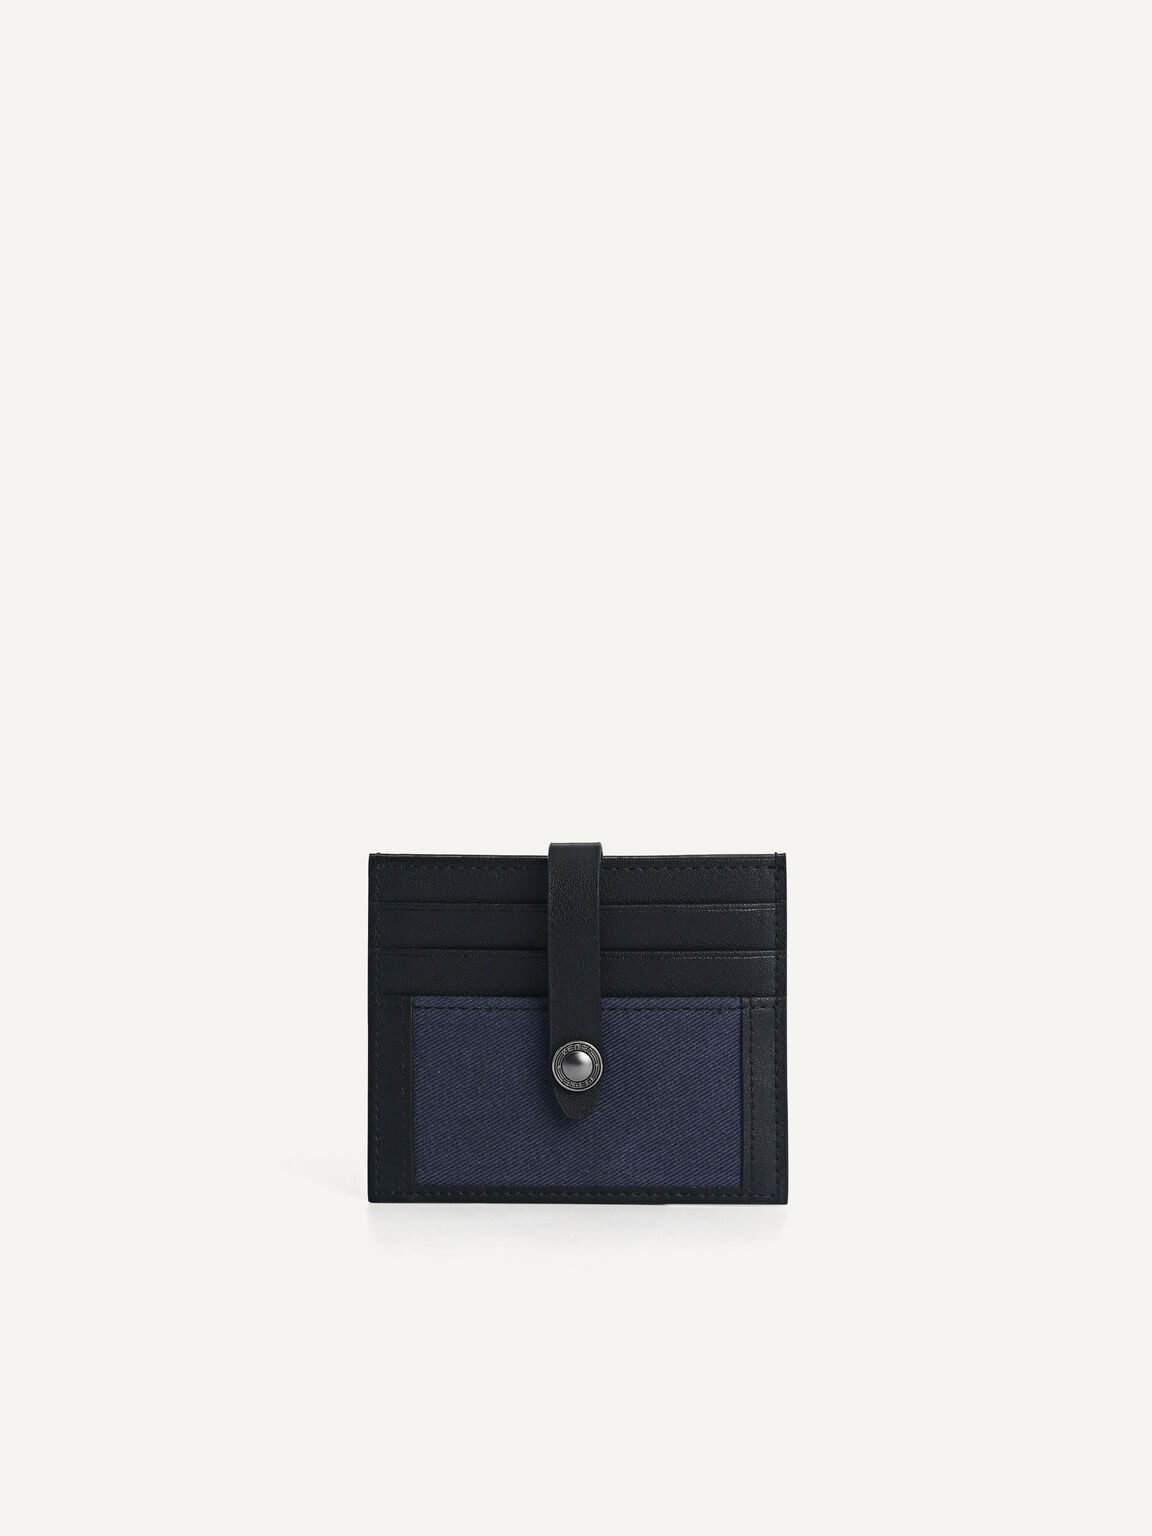 Leather Two-Tone Card Holder, Black